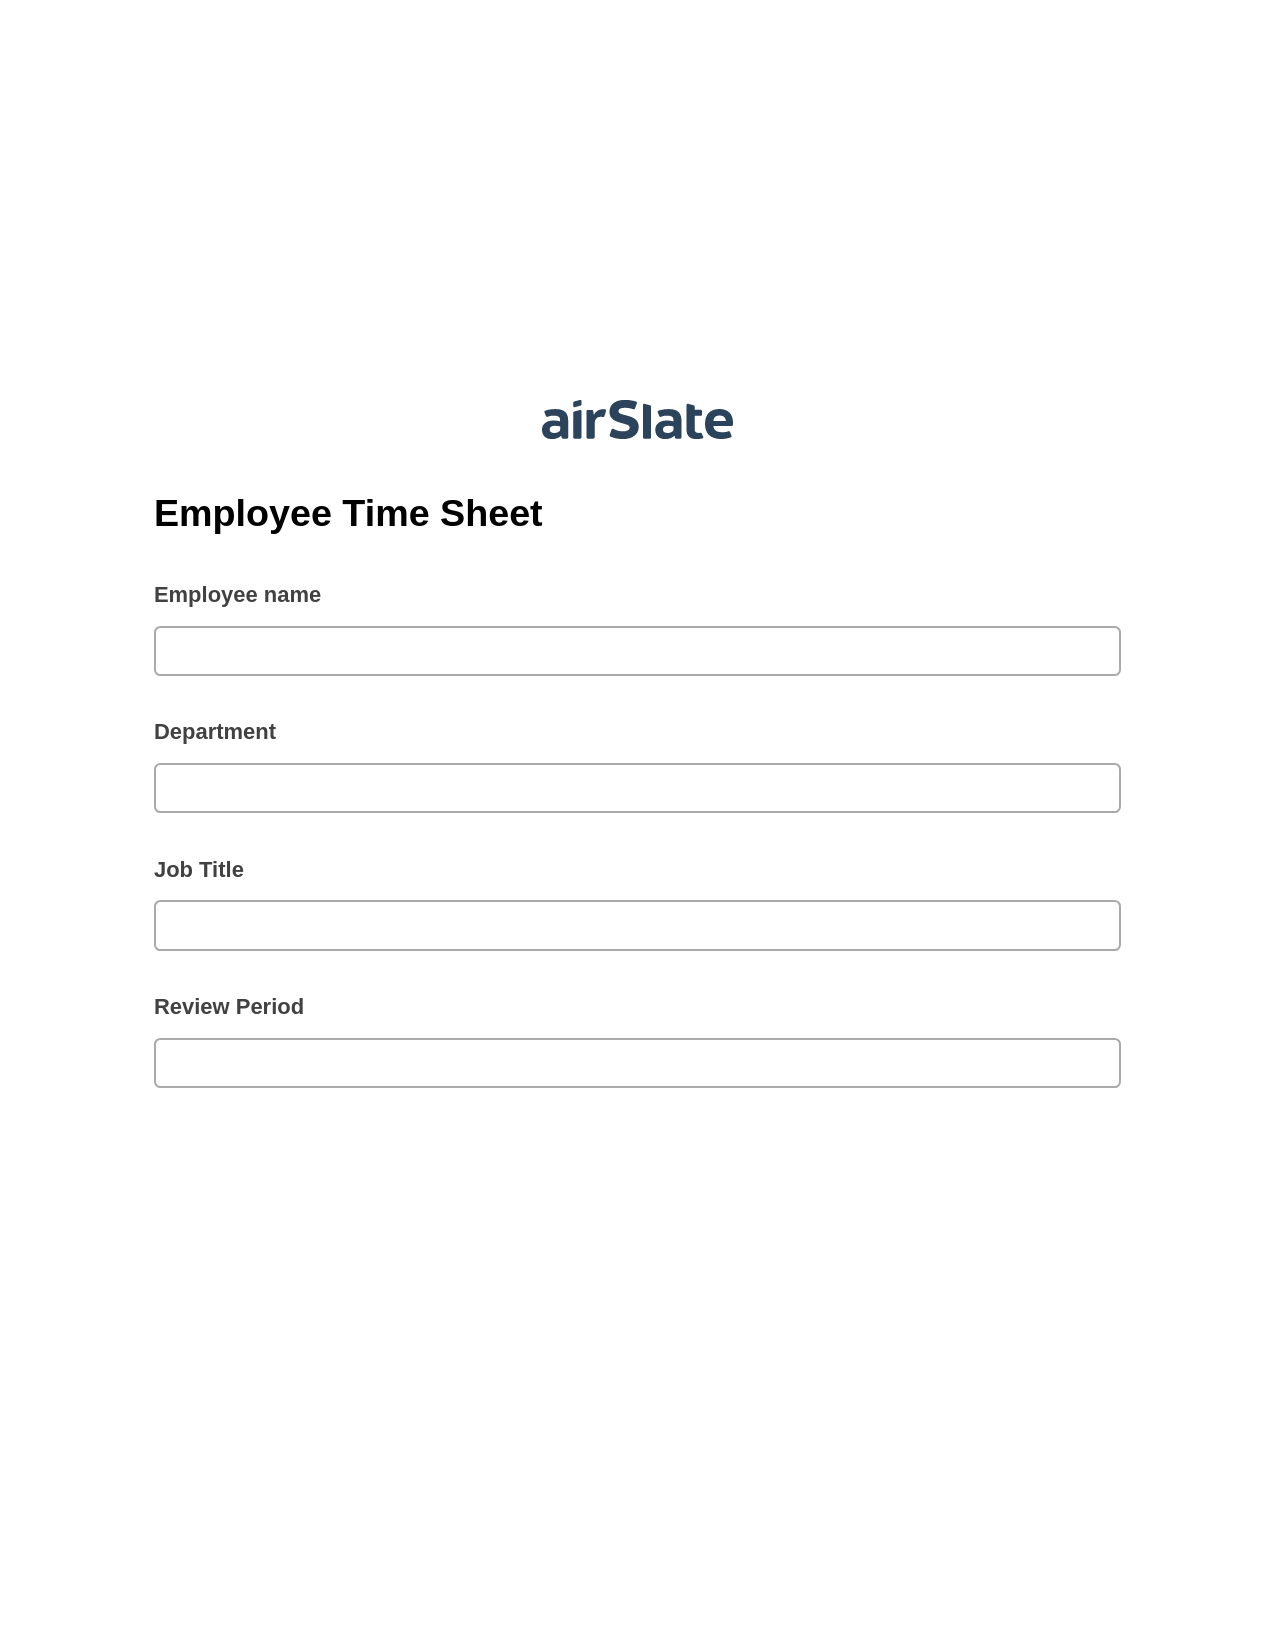 Employee Time Sheet Pre-fill Document Bot, Create Salesforce Records Bot, Email Notification Postfinish Bot